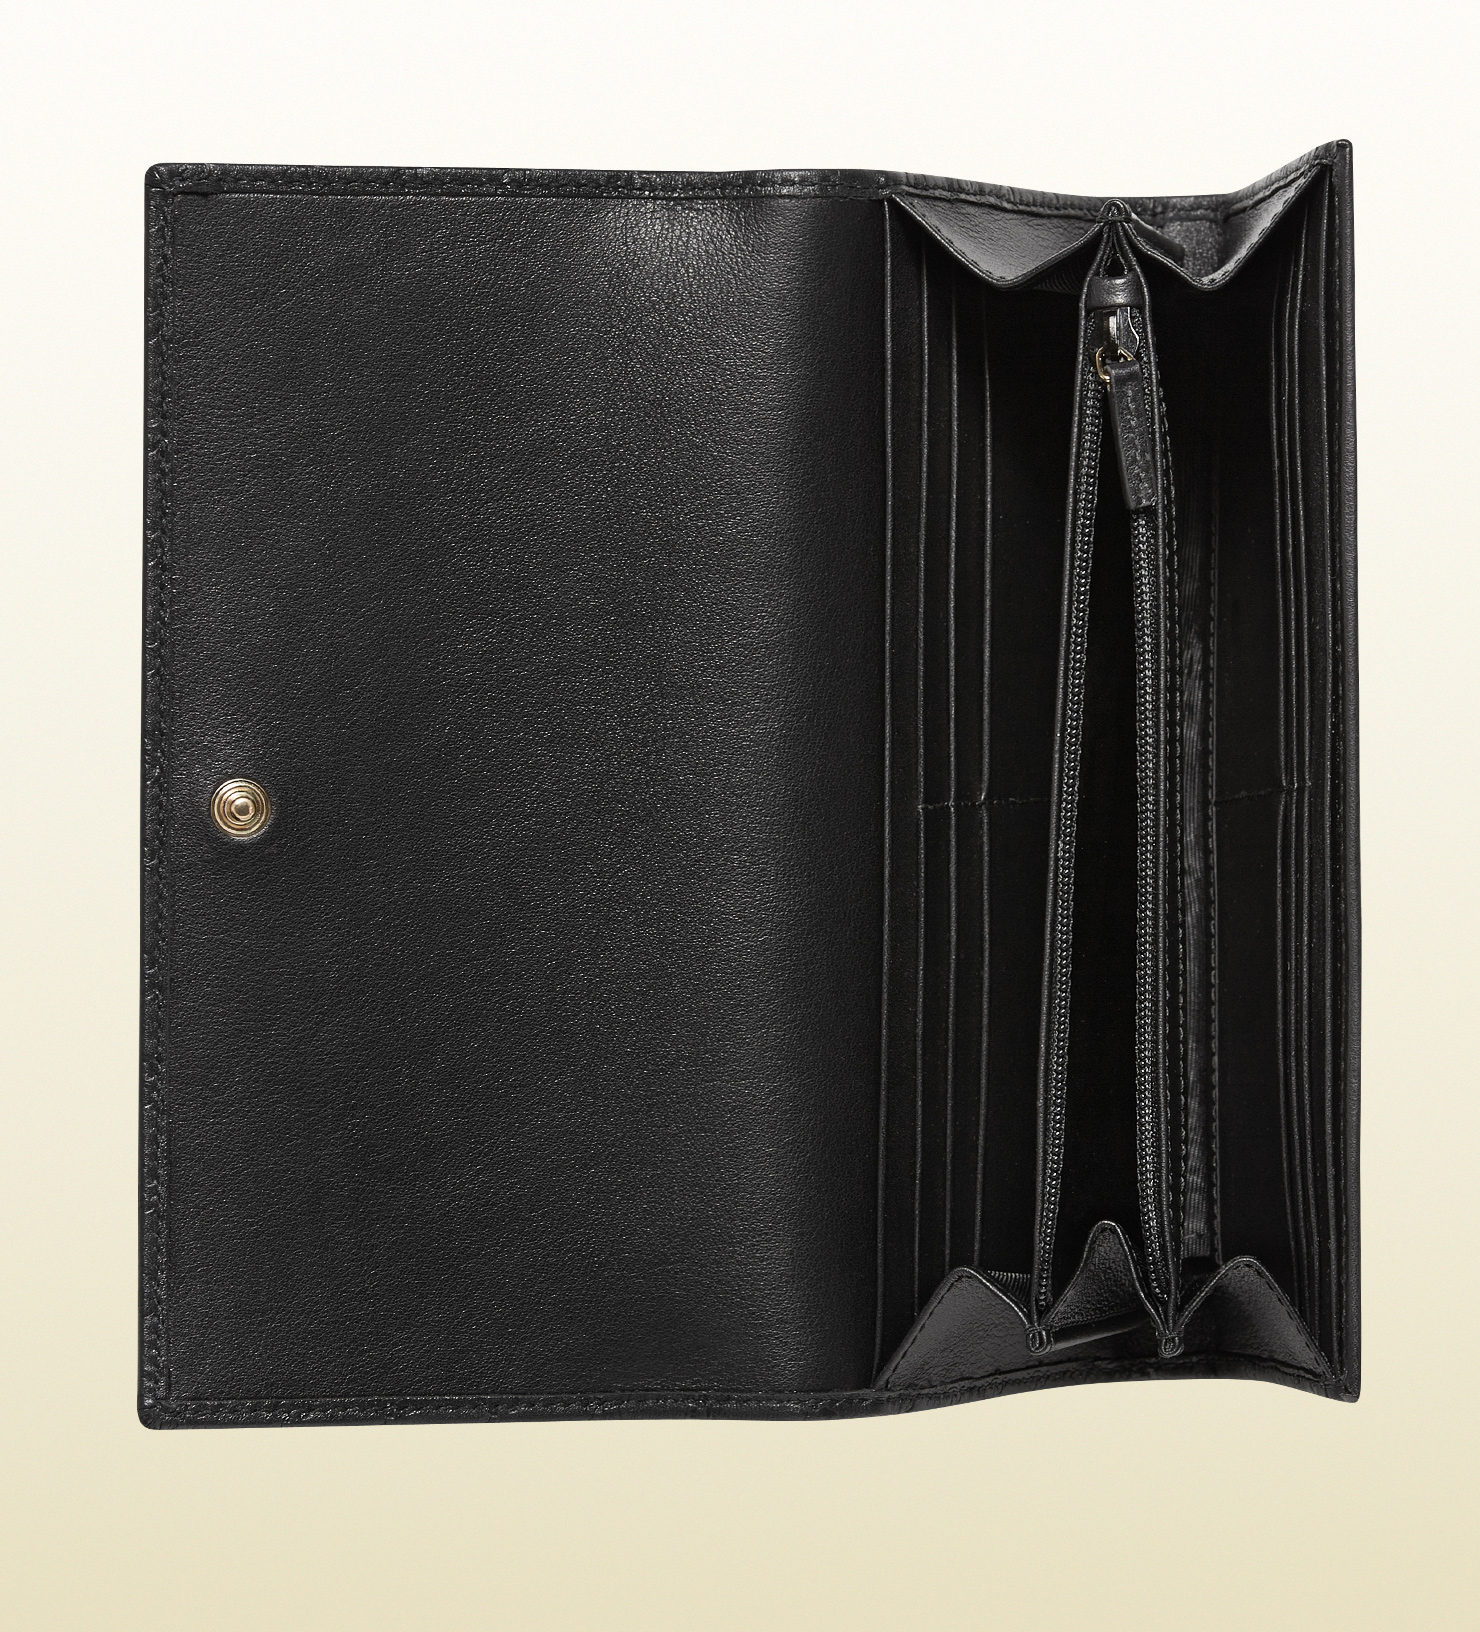 Gucci Bow Microssima Leather Continental Wallet in Black - Lyst